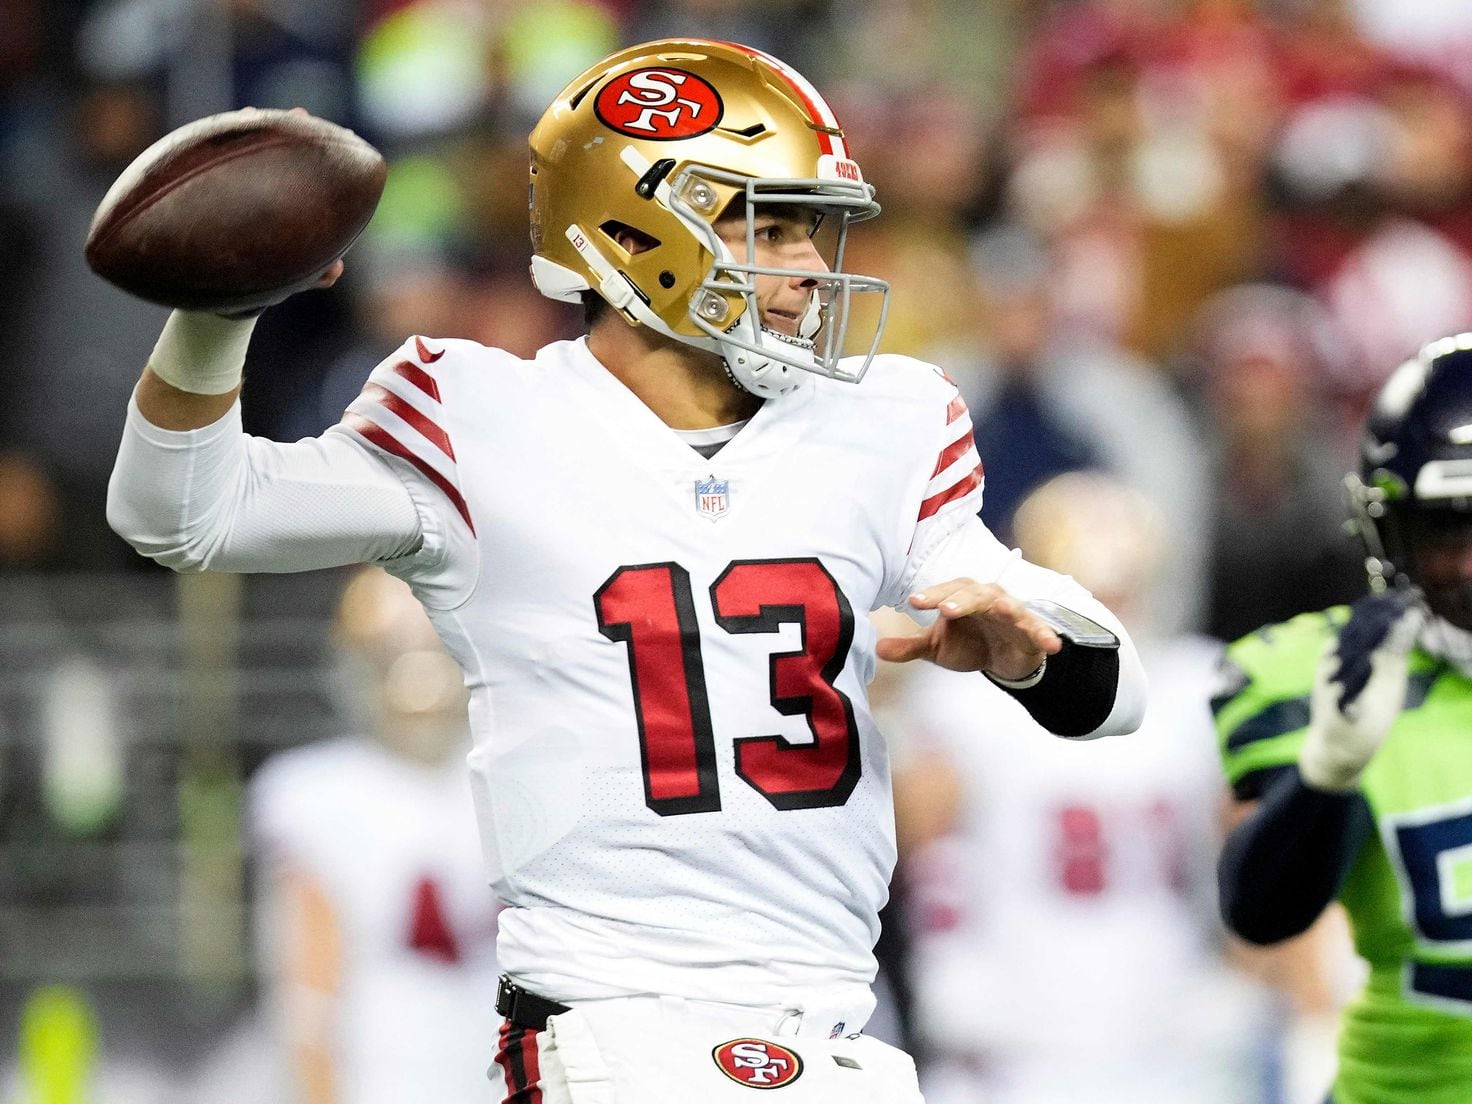 Seahawks vs 49ers NFL Wild Card Weekend: Times, how to watch